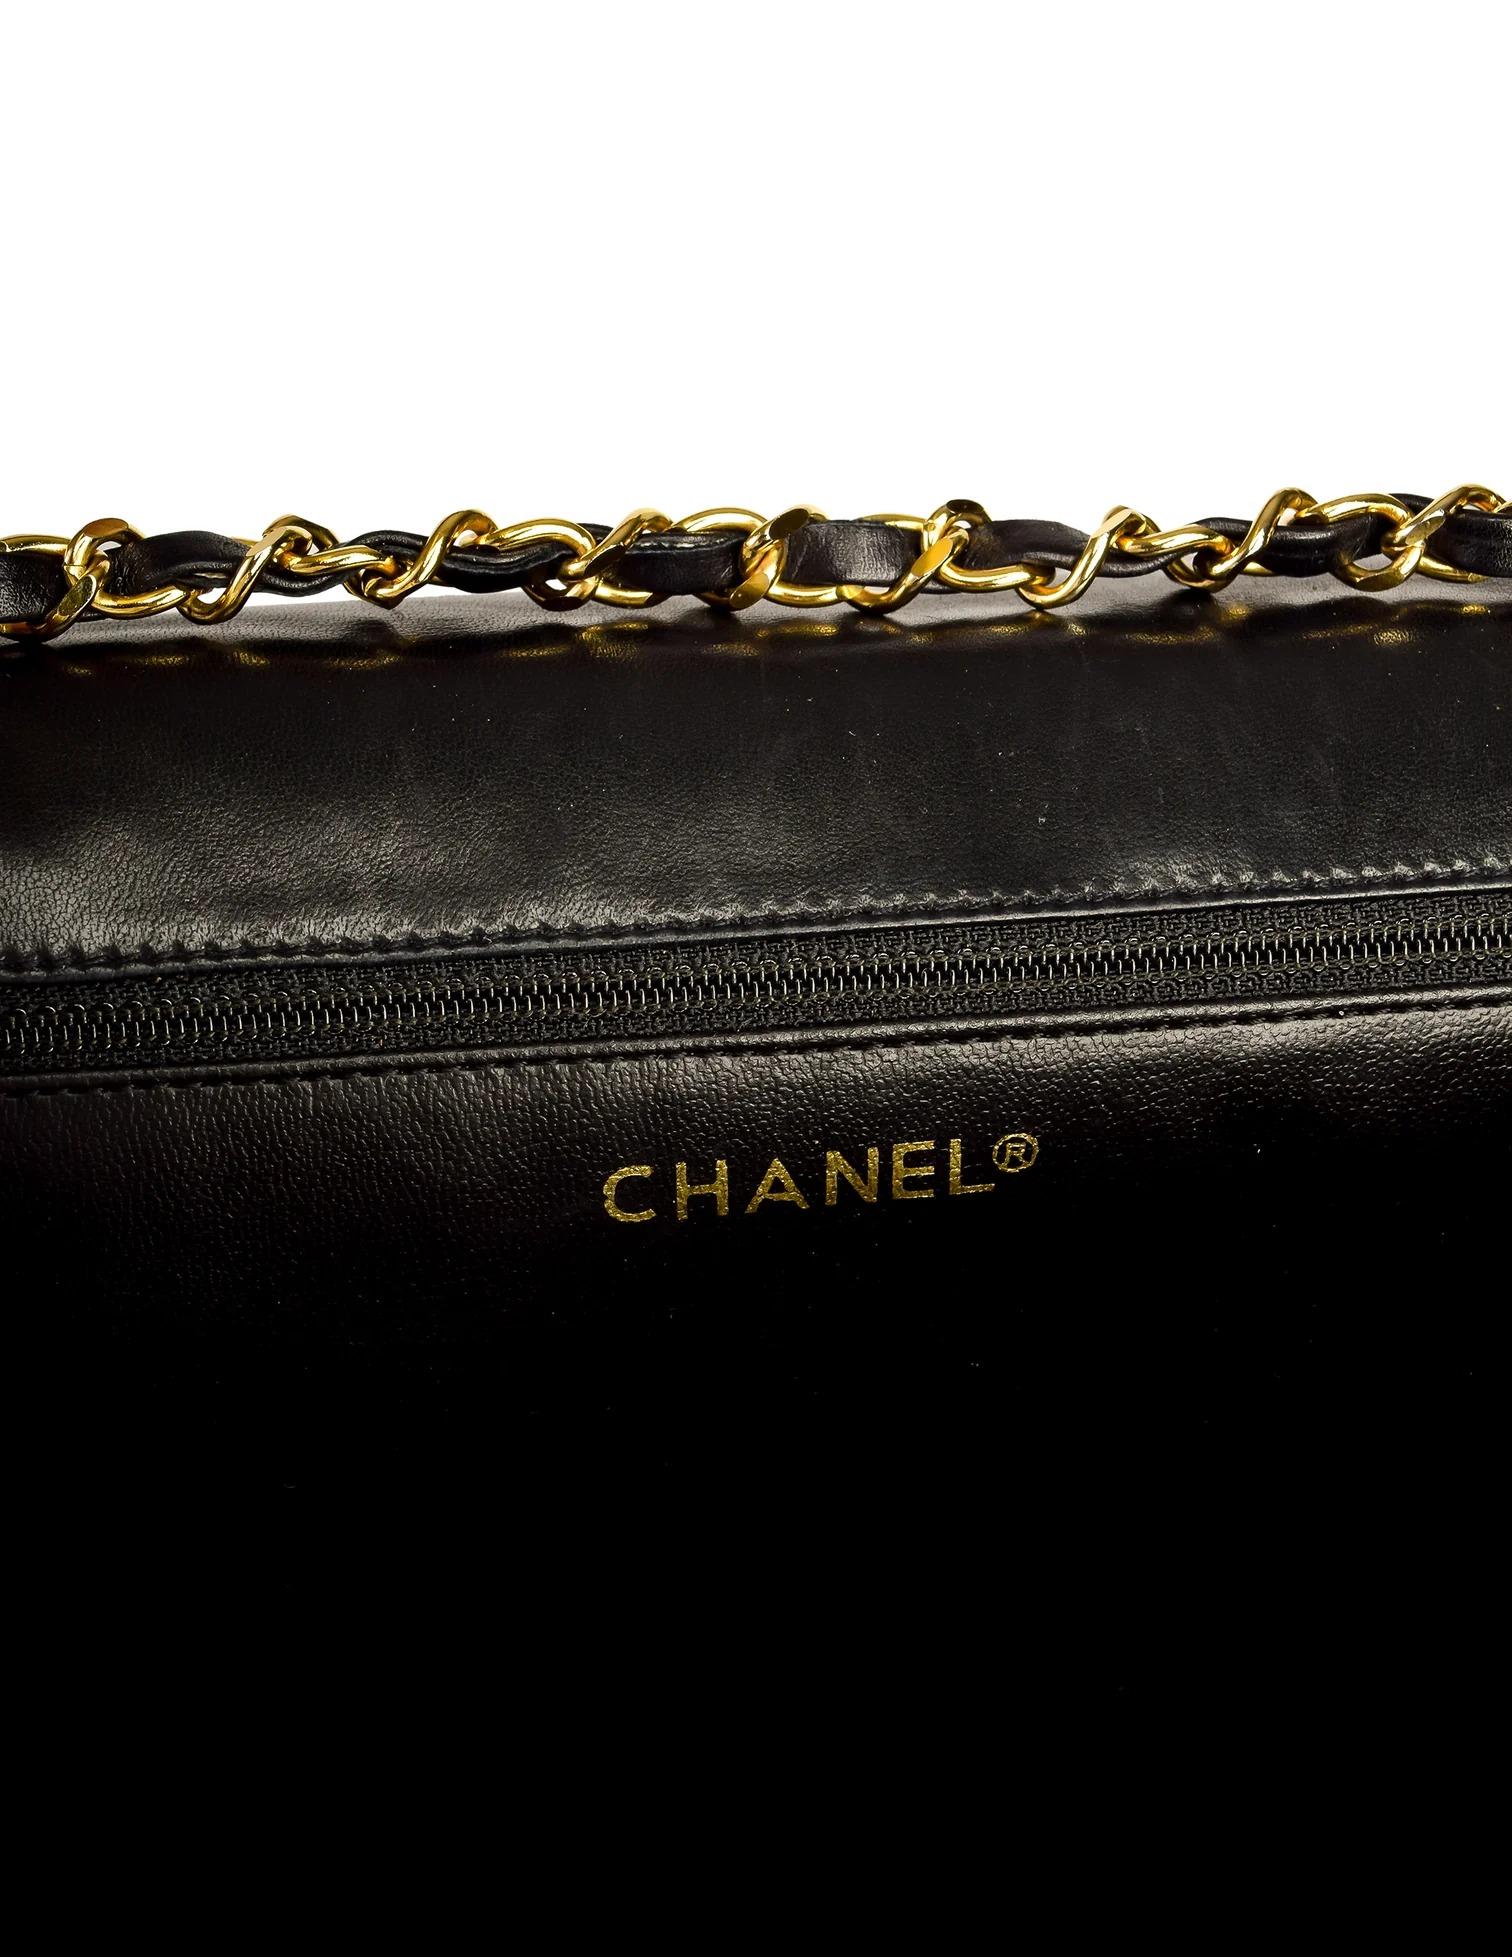 Chanel 1990 Rare Jumbo Maxi XL Vintage Classic Flap Giant Clutch Briefcase For Sale 10